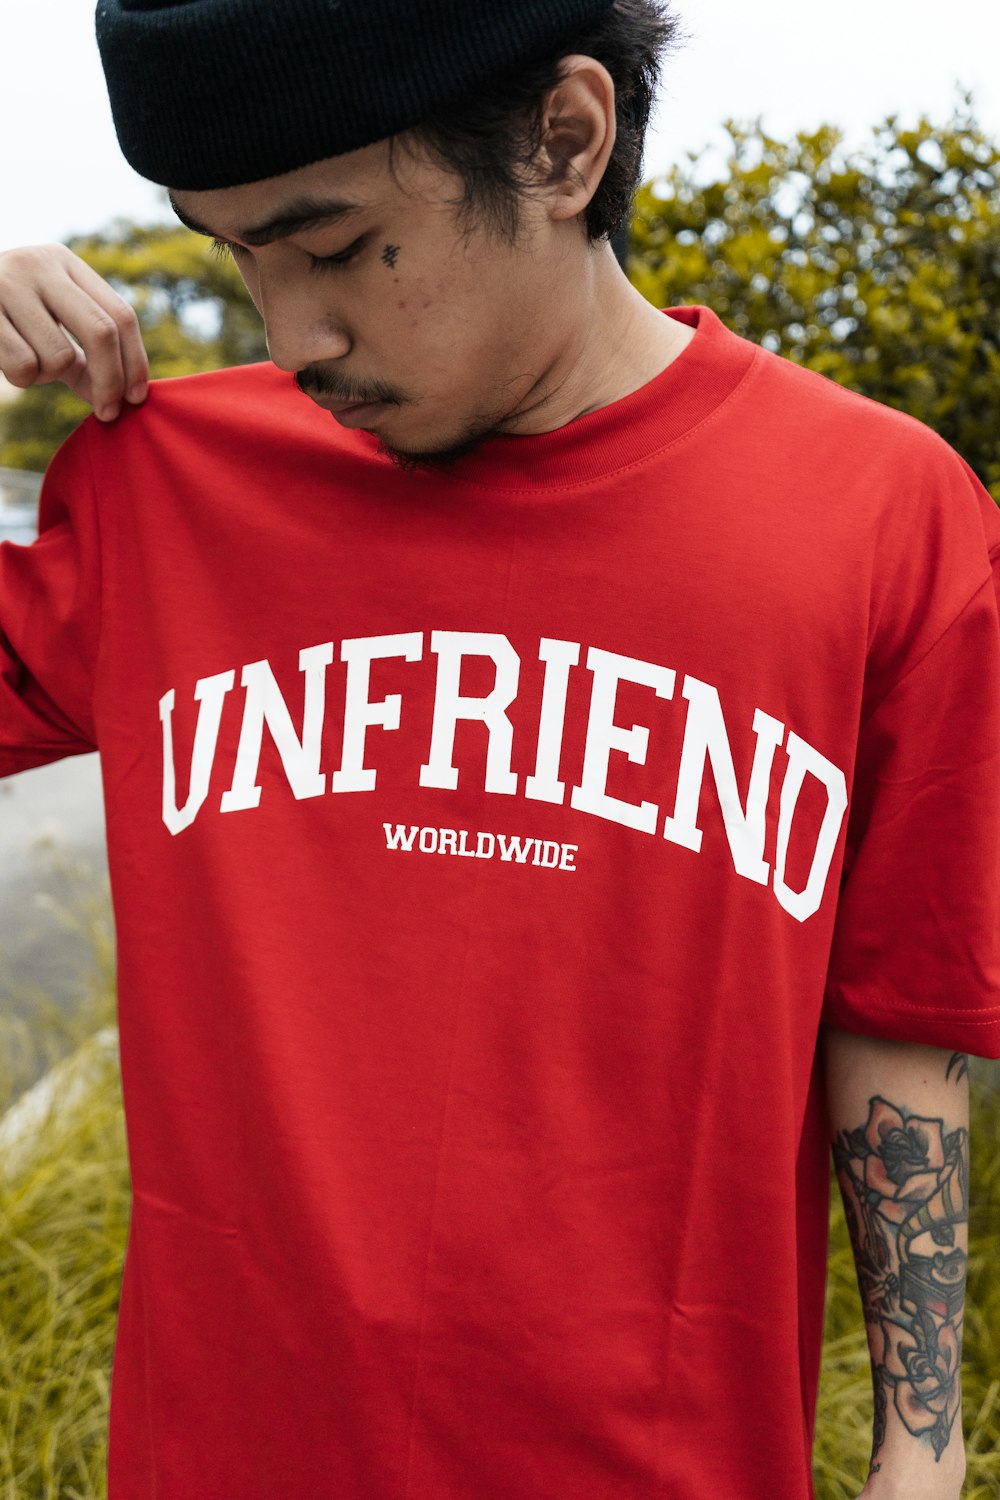 man in red and white crew neck t-shirt